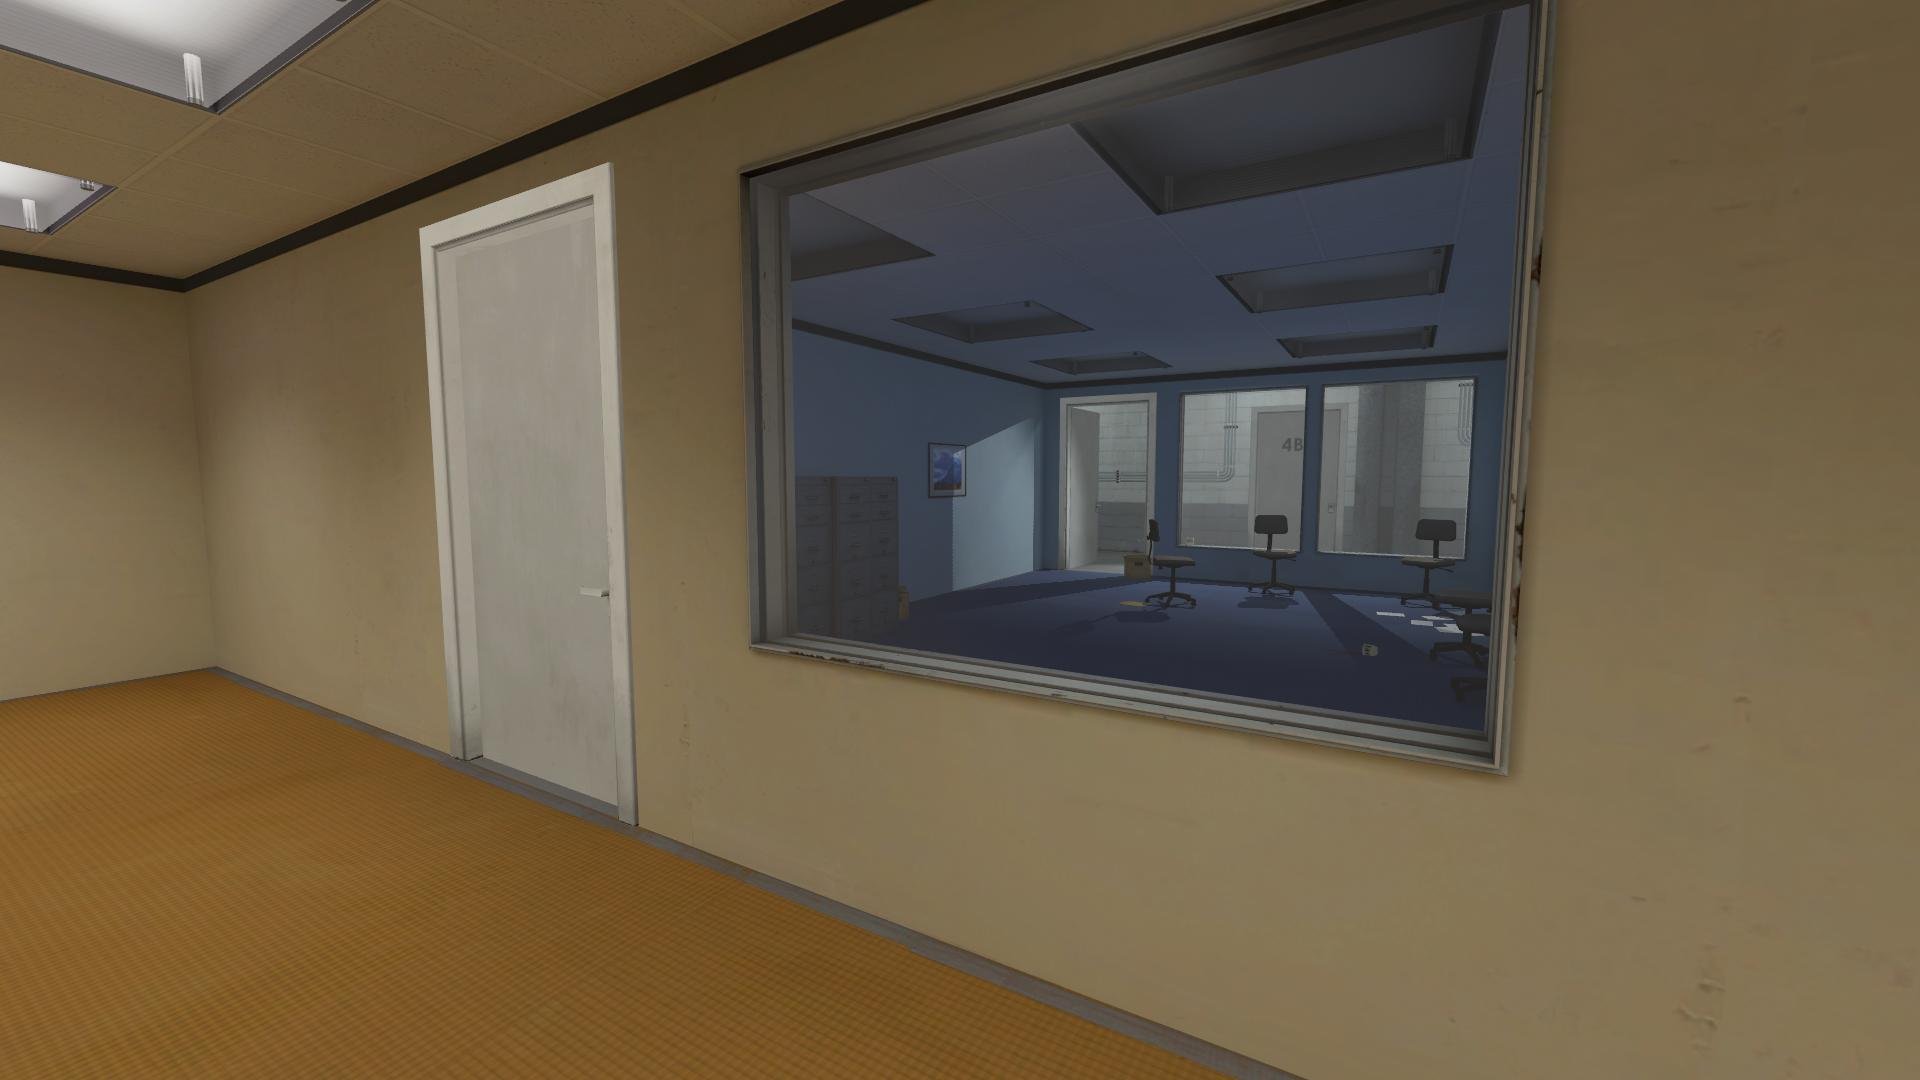 Ultra deluxe. The Stanley Parable Ultra Deluxe v.1.05 (2022). The Stanley Parable системные требования. The Stanley Parable: Ultra Deluxe. Стенли Парабле ультра Делюкс русская озвучка.